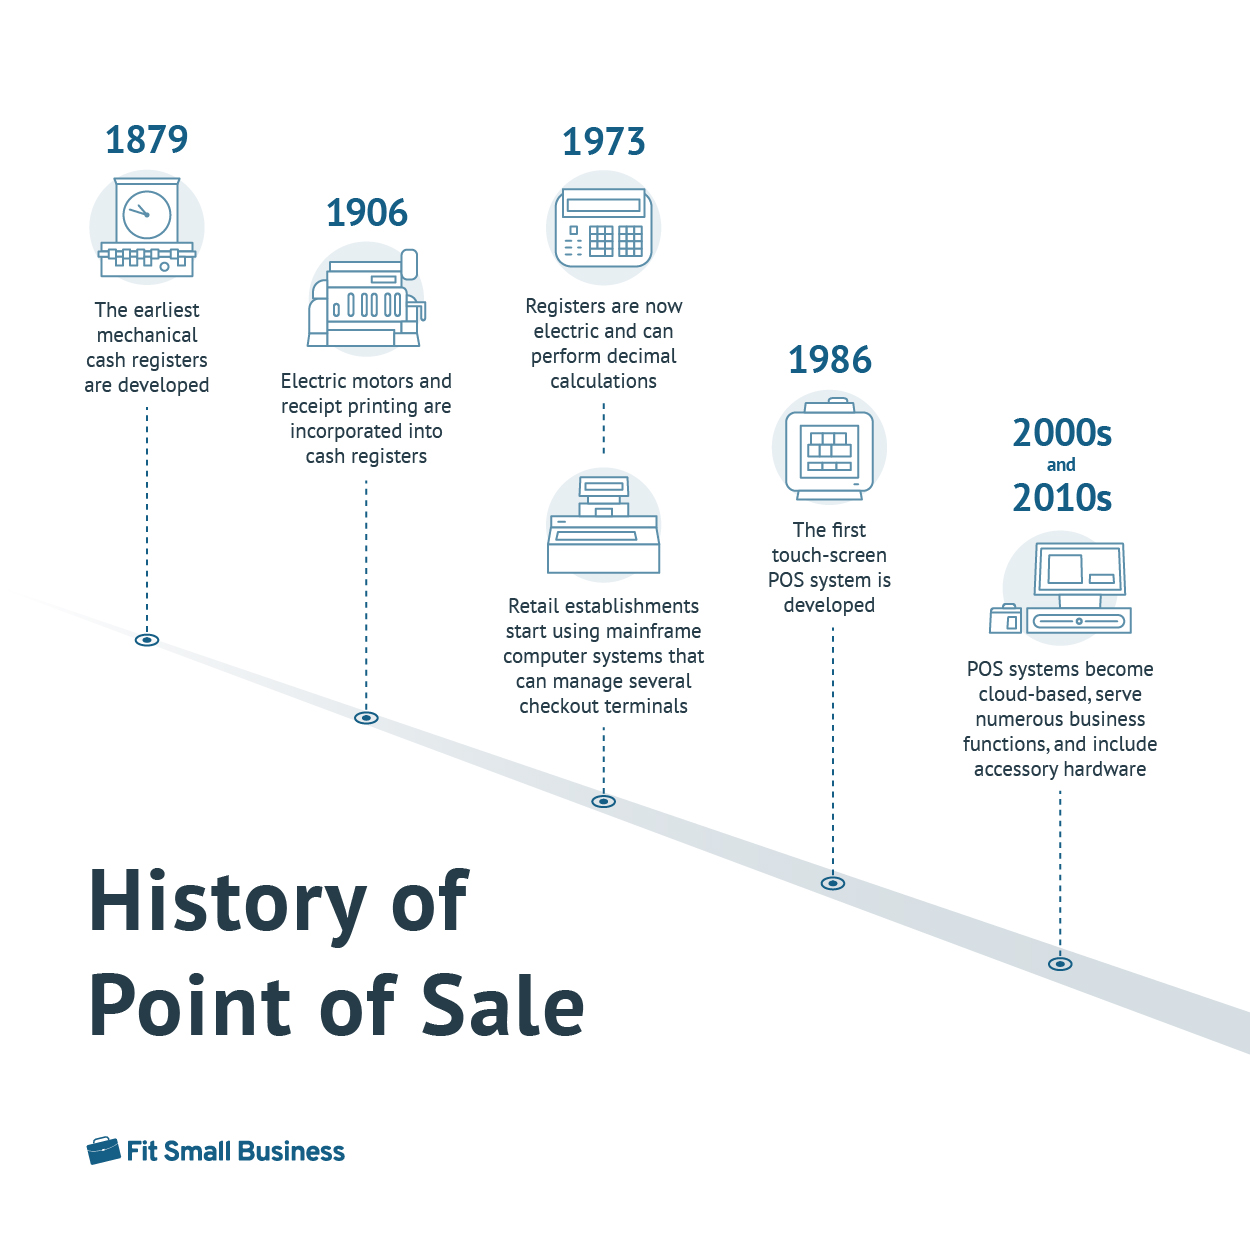 Visual timeline of point of sale technology, starting in 1879 through to the 2010s.